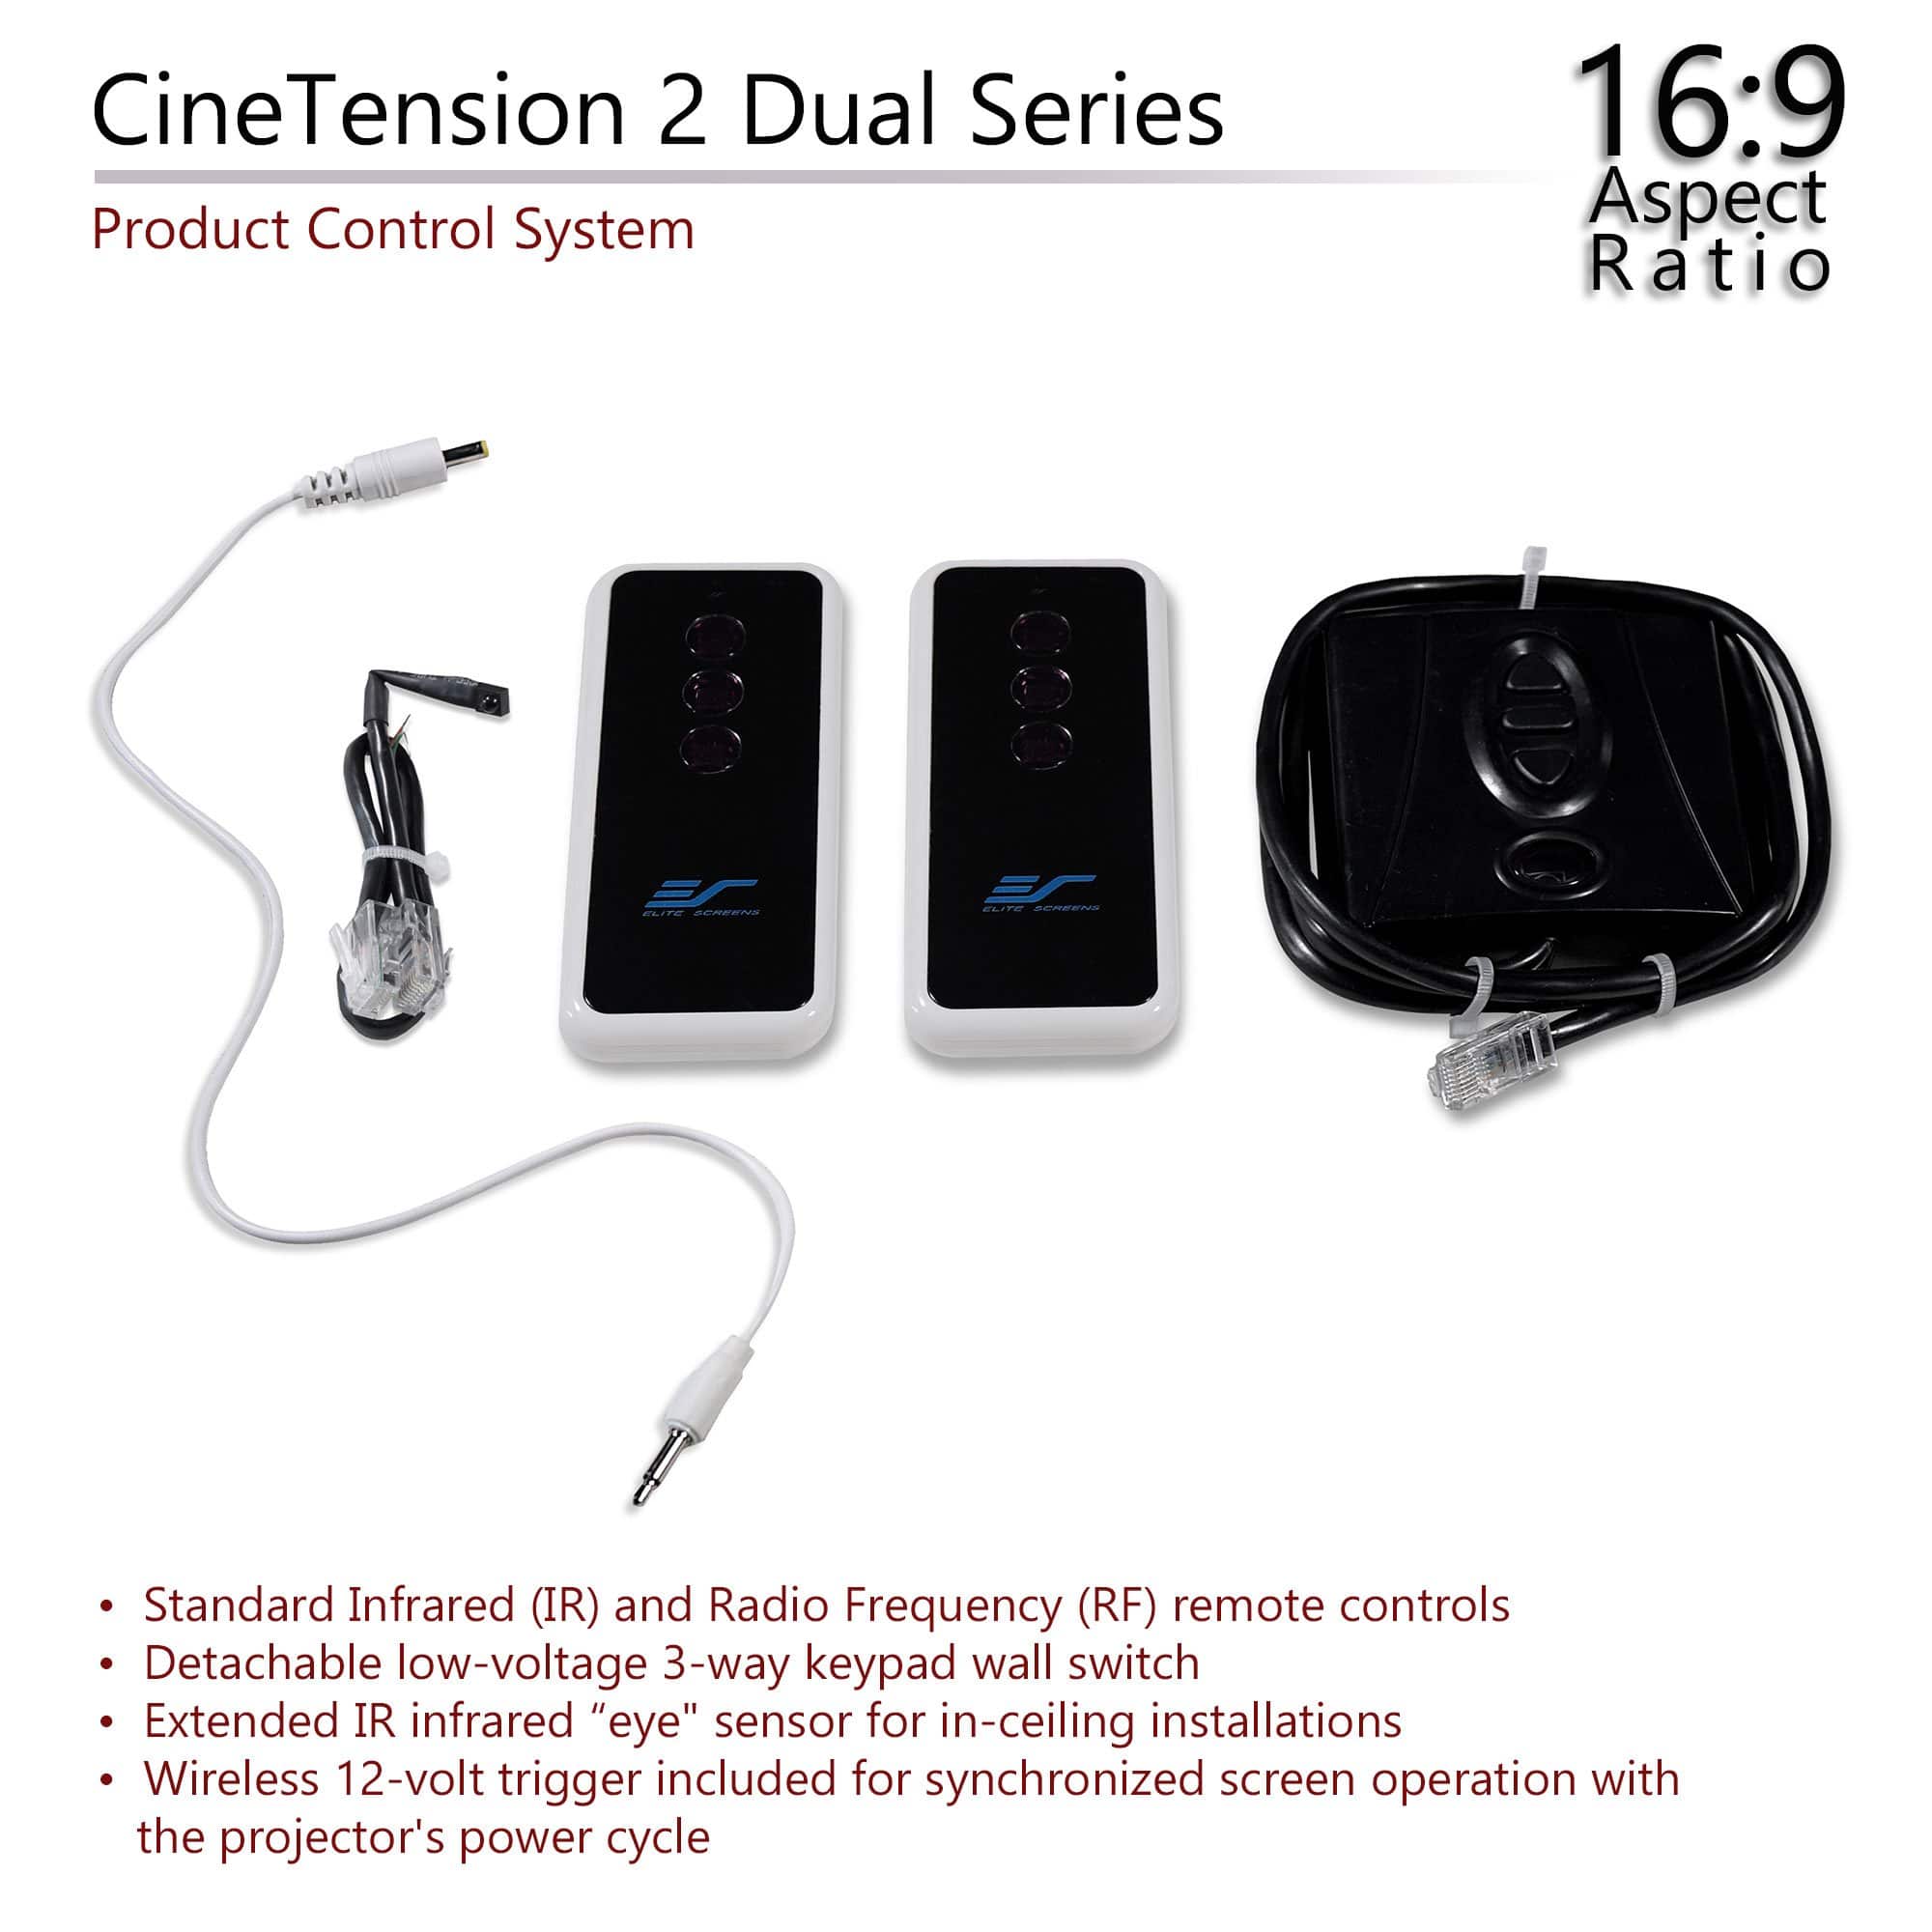 Elite Screens CineTension 2 WraithVeil® Dual 135" Diag. 16:9, 4K/8K, Front/Rear Projection Tab-Tensioned Electric Motorized Drop Down Projector Screen, TE135HR2-DUAL